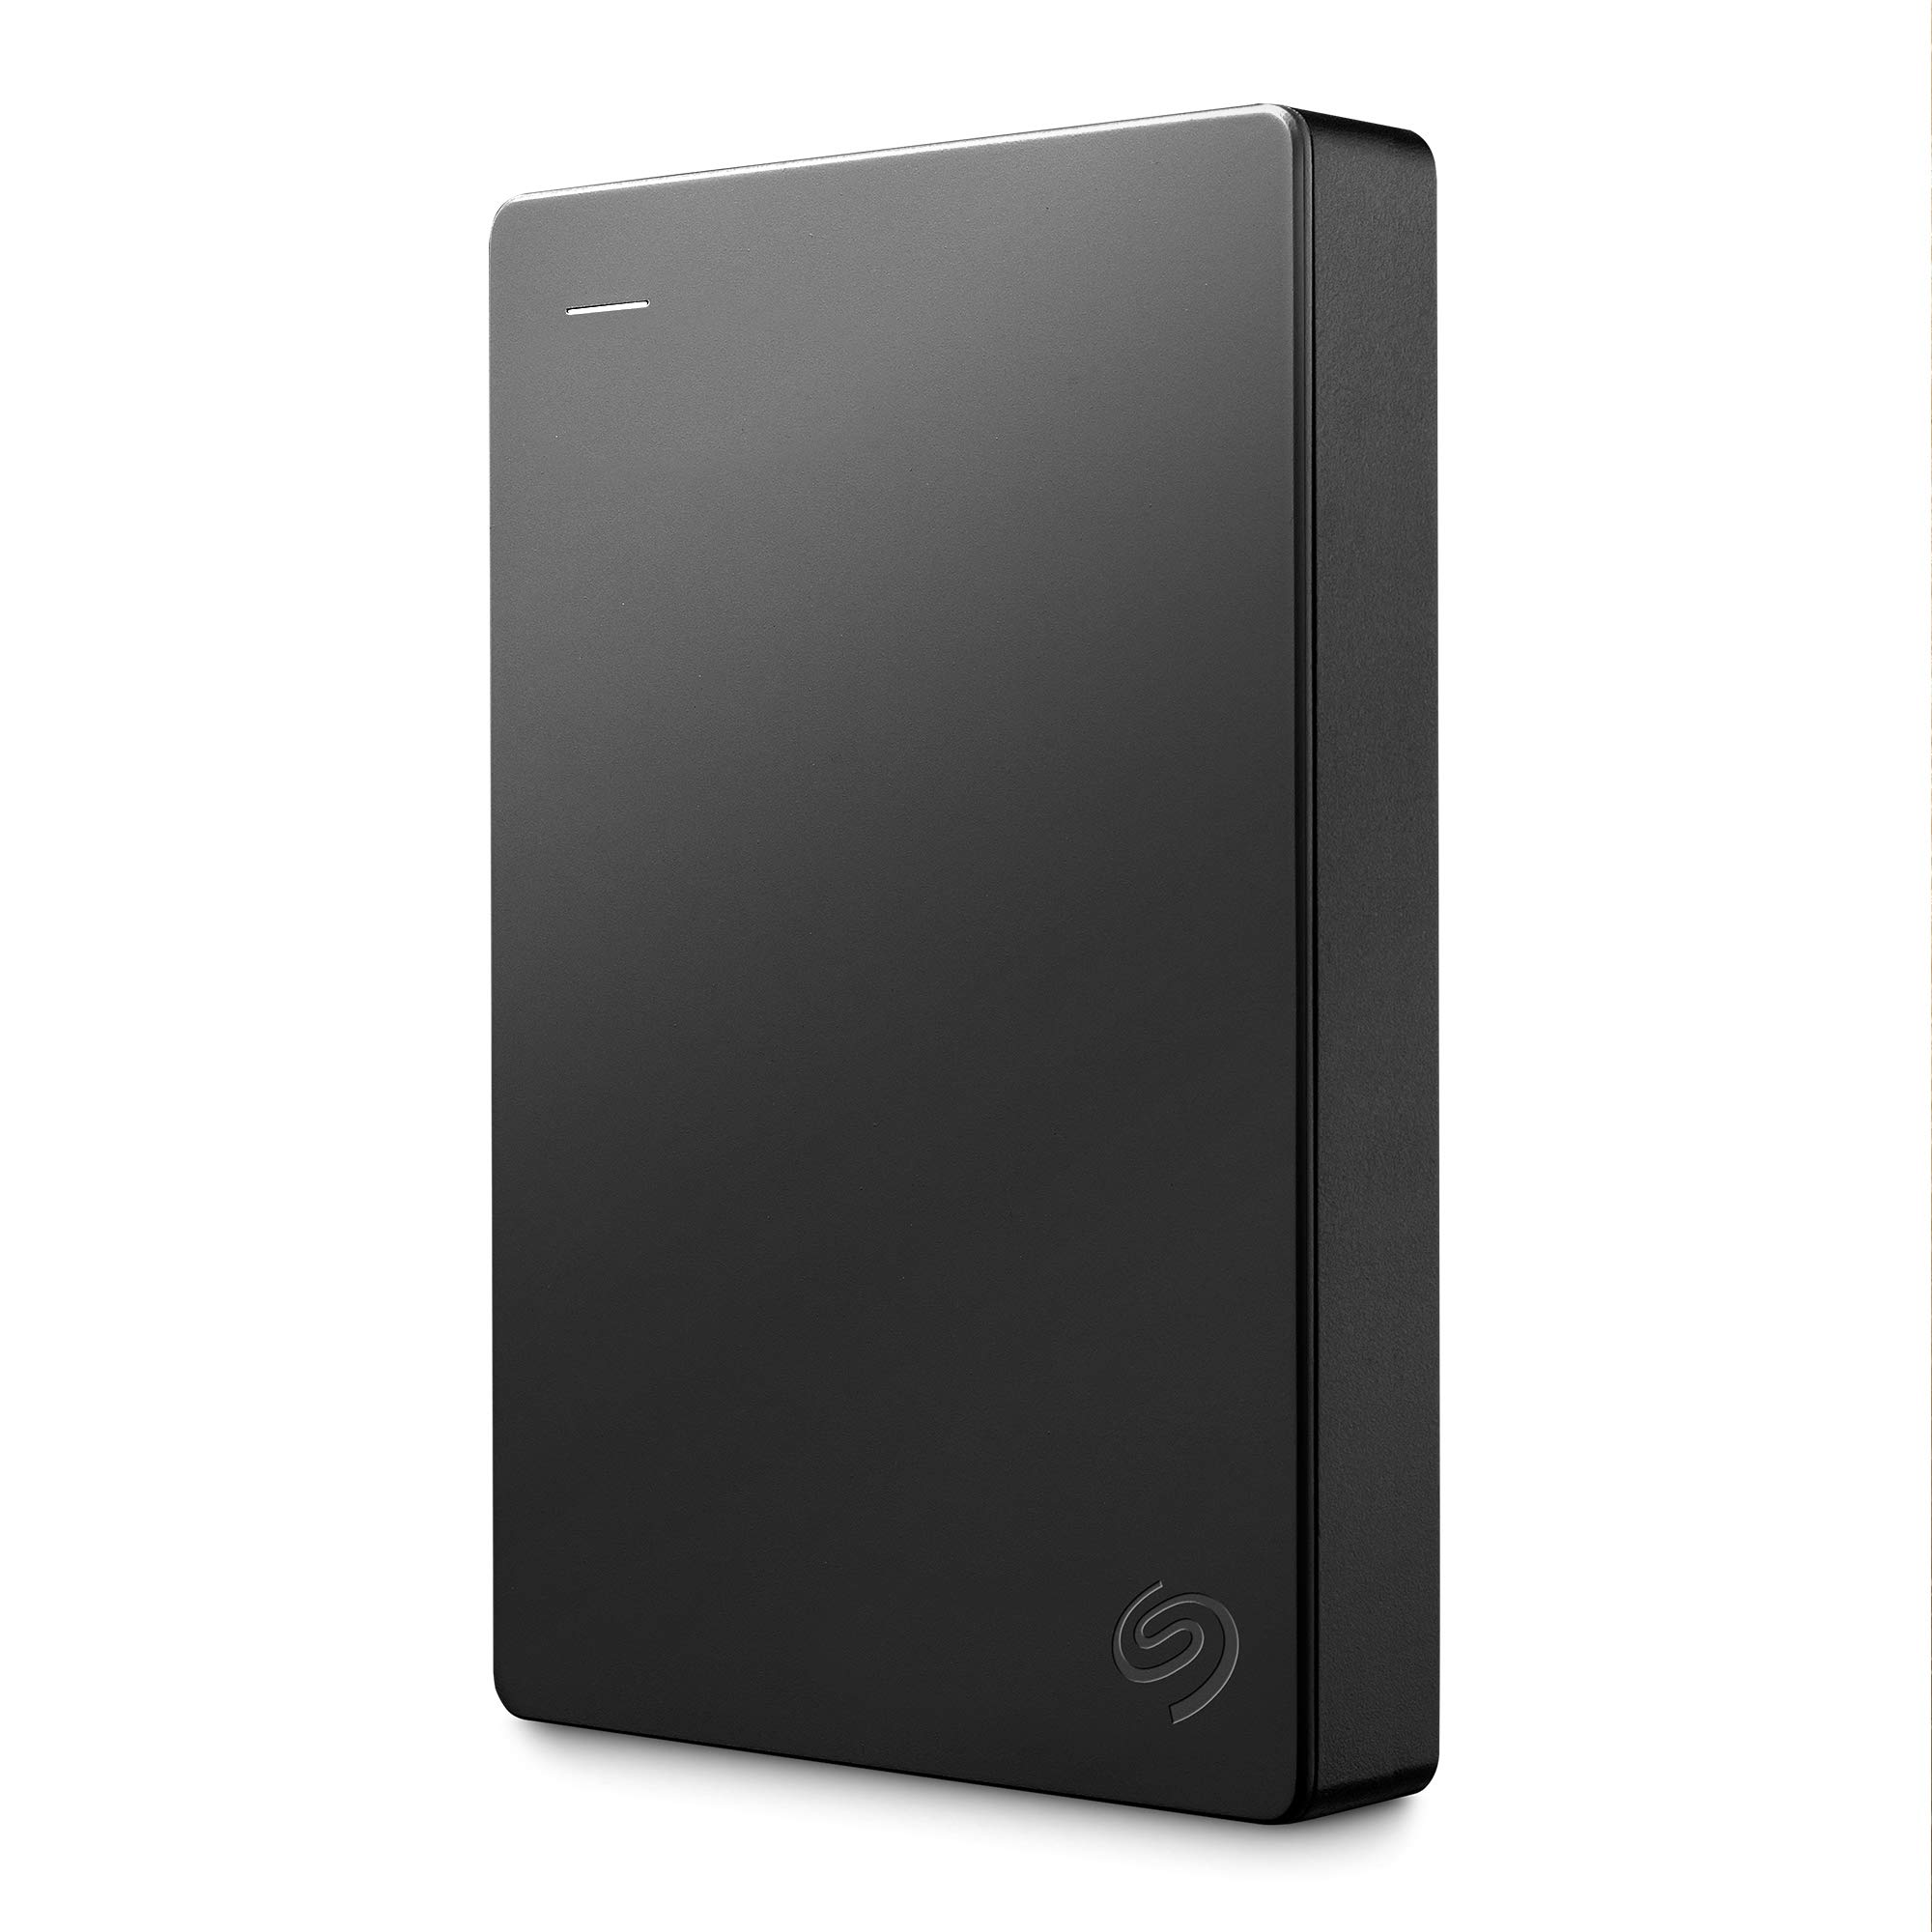 Seagate Portable 4TB External Hard Drive HDD – USB 3.0 for PC, Mac, Xbox, & PlayStation - 1-Year Rescue Service (STGX4000400)